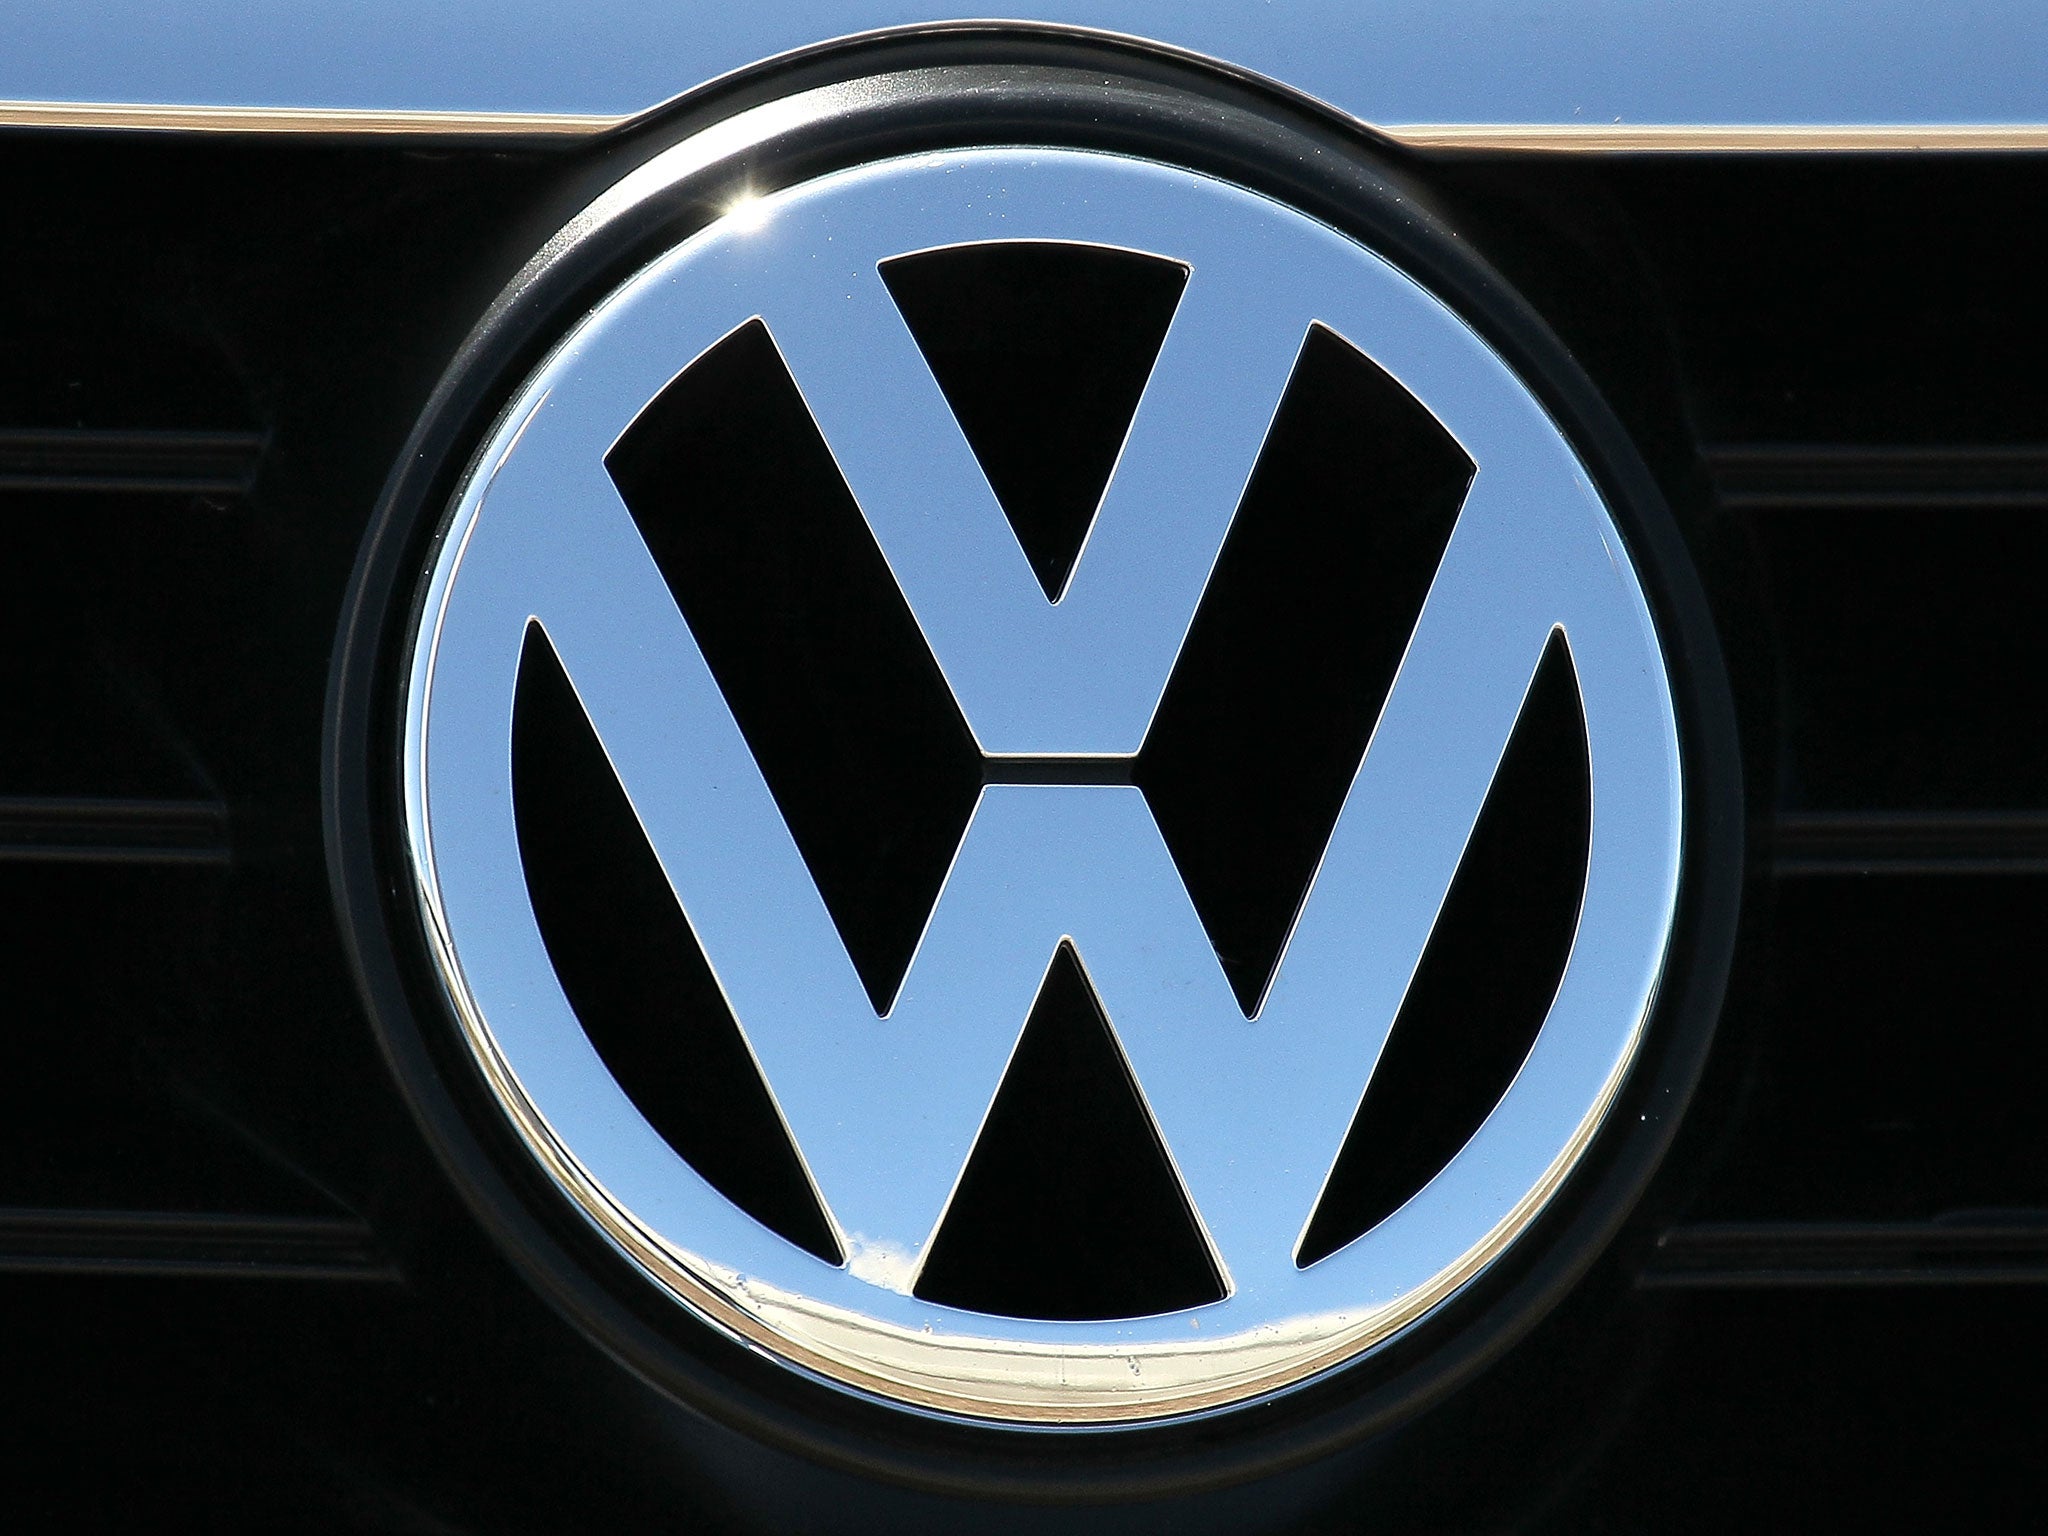 Volkswagen’s vehemence in defending the security of its vehicles appears to be paying off